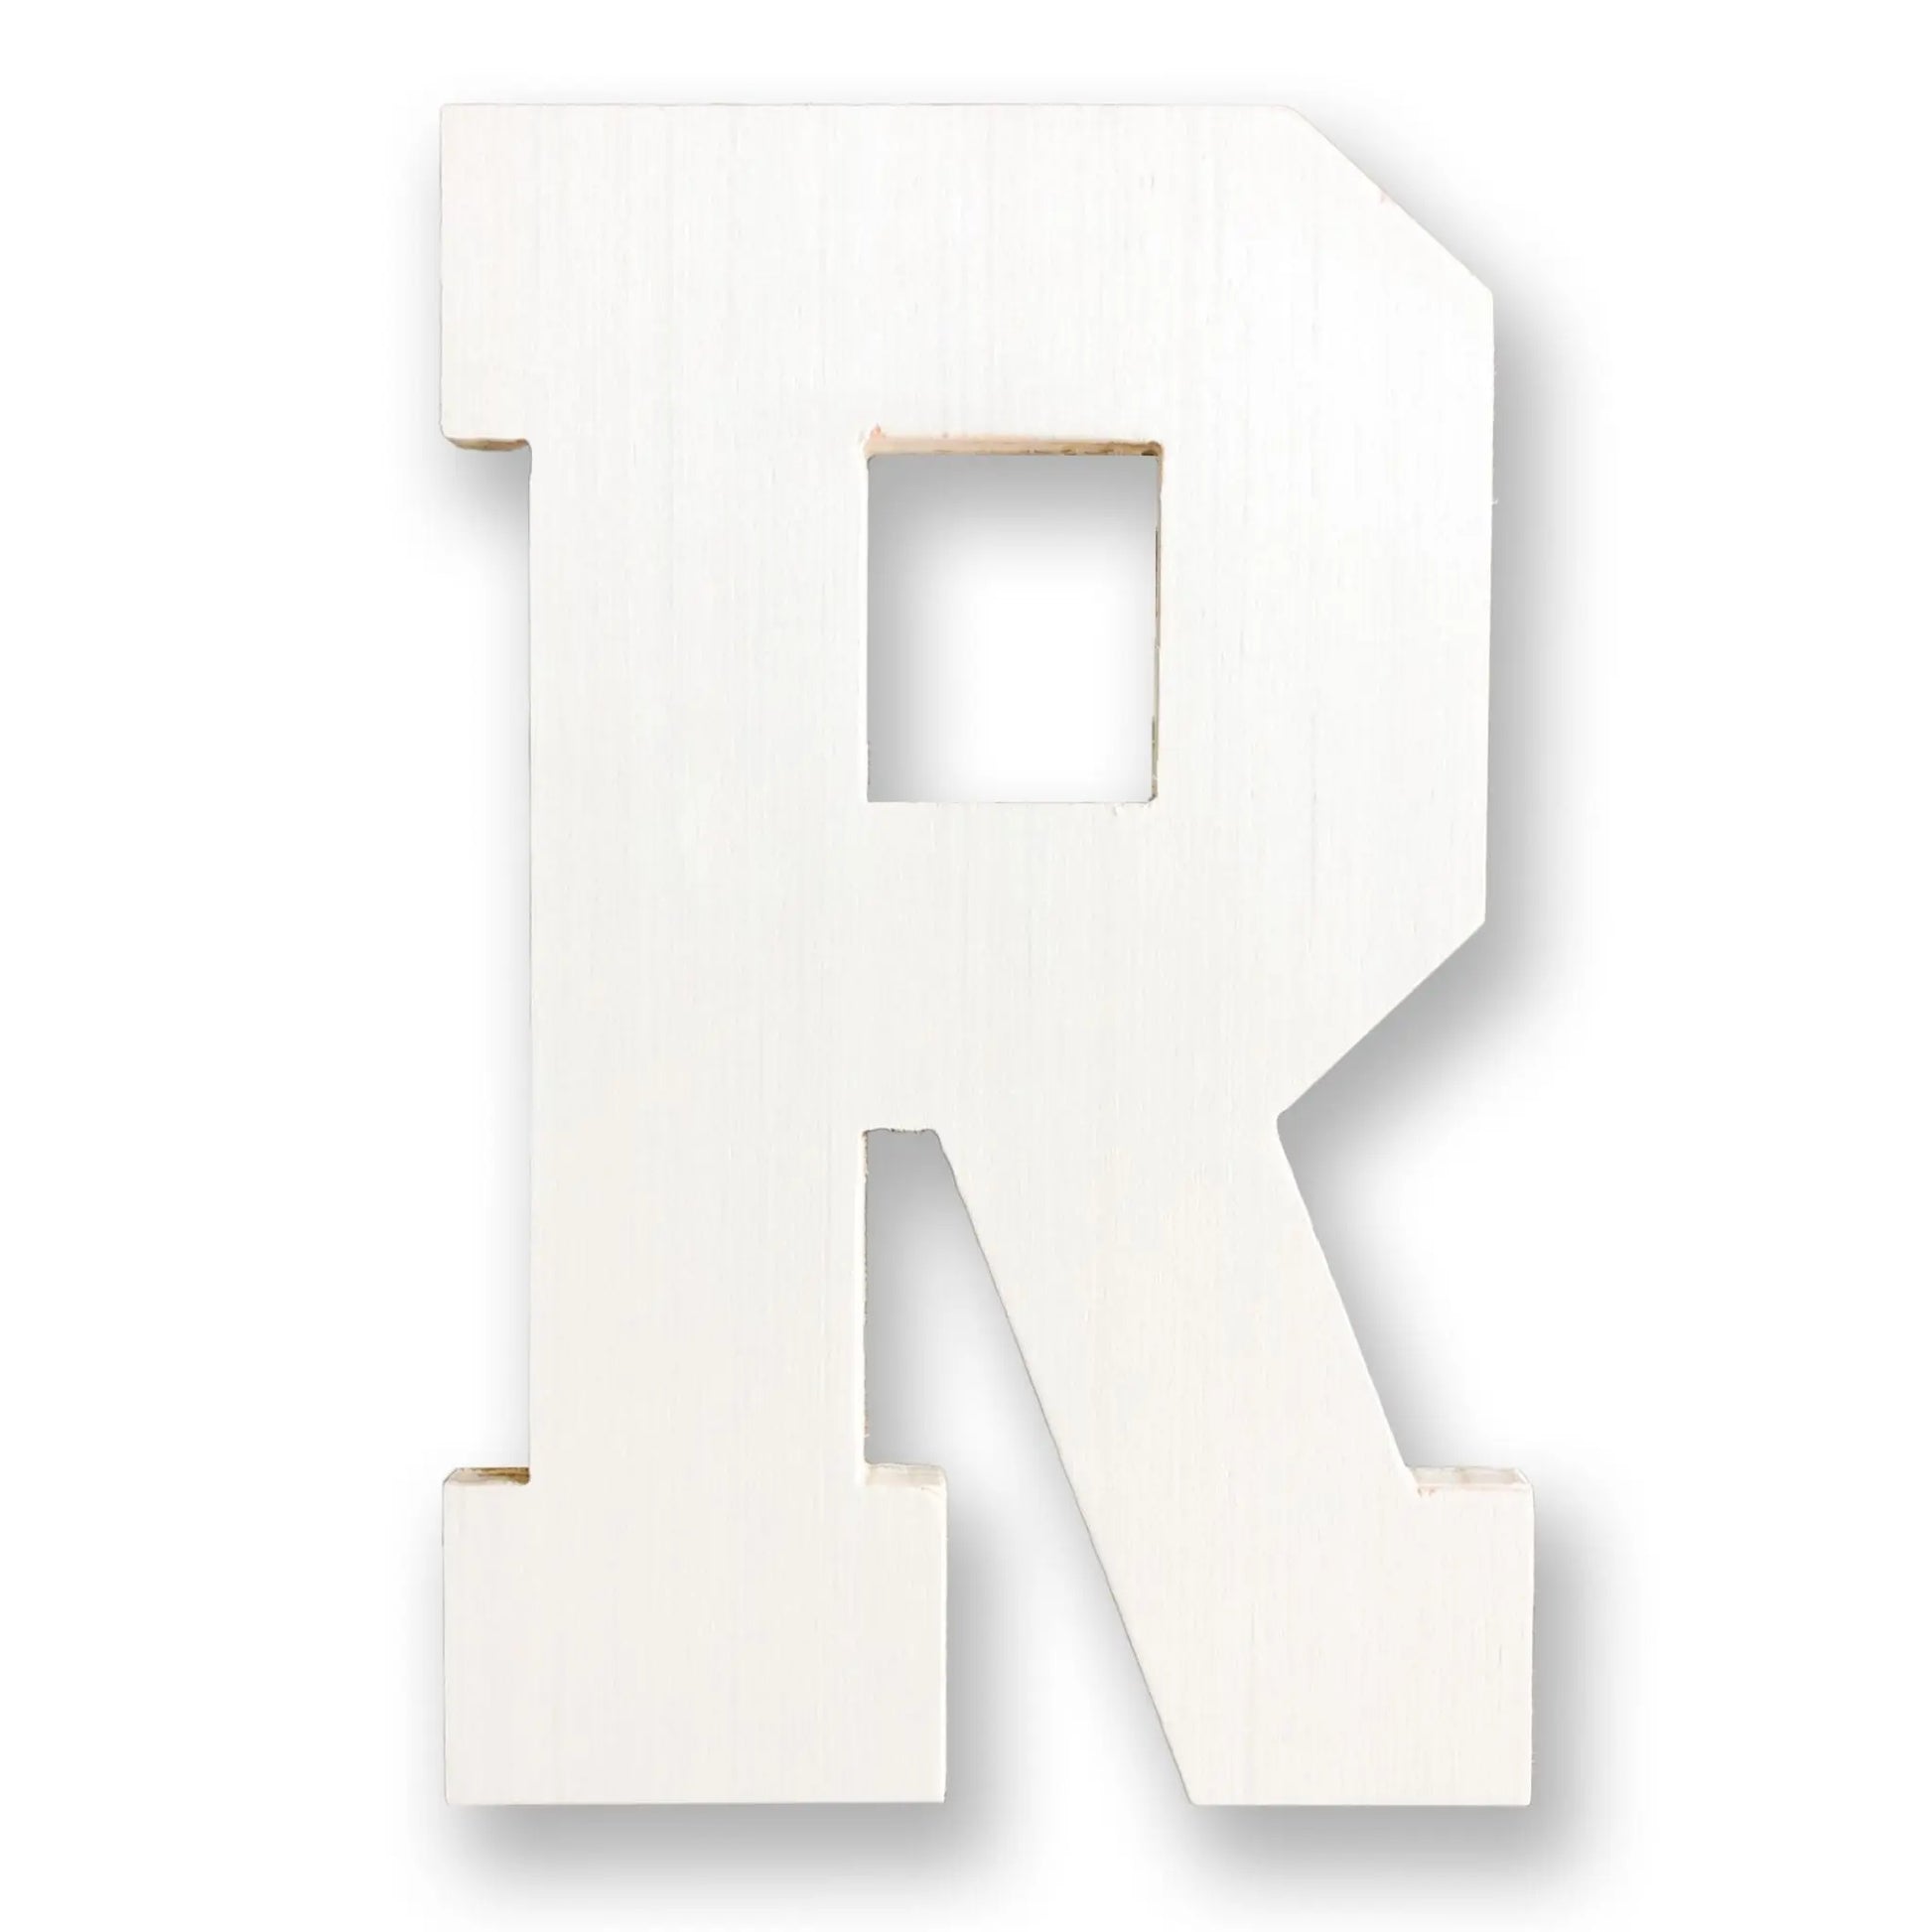 Wooden Letters R, 3 Inch Wooden Decoration W Double-Sided Tape